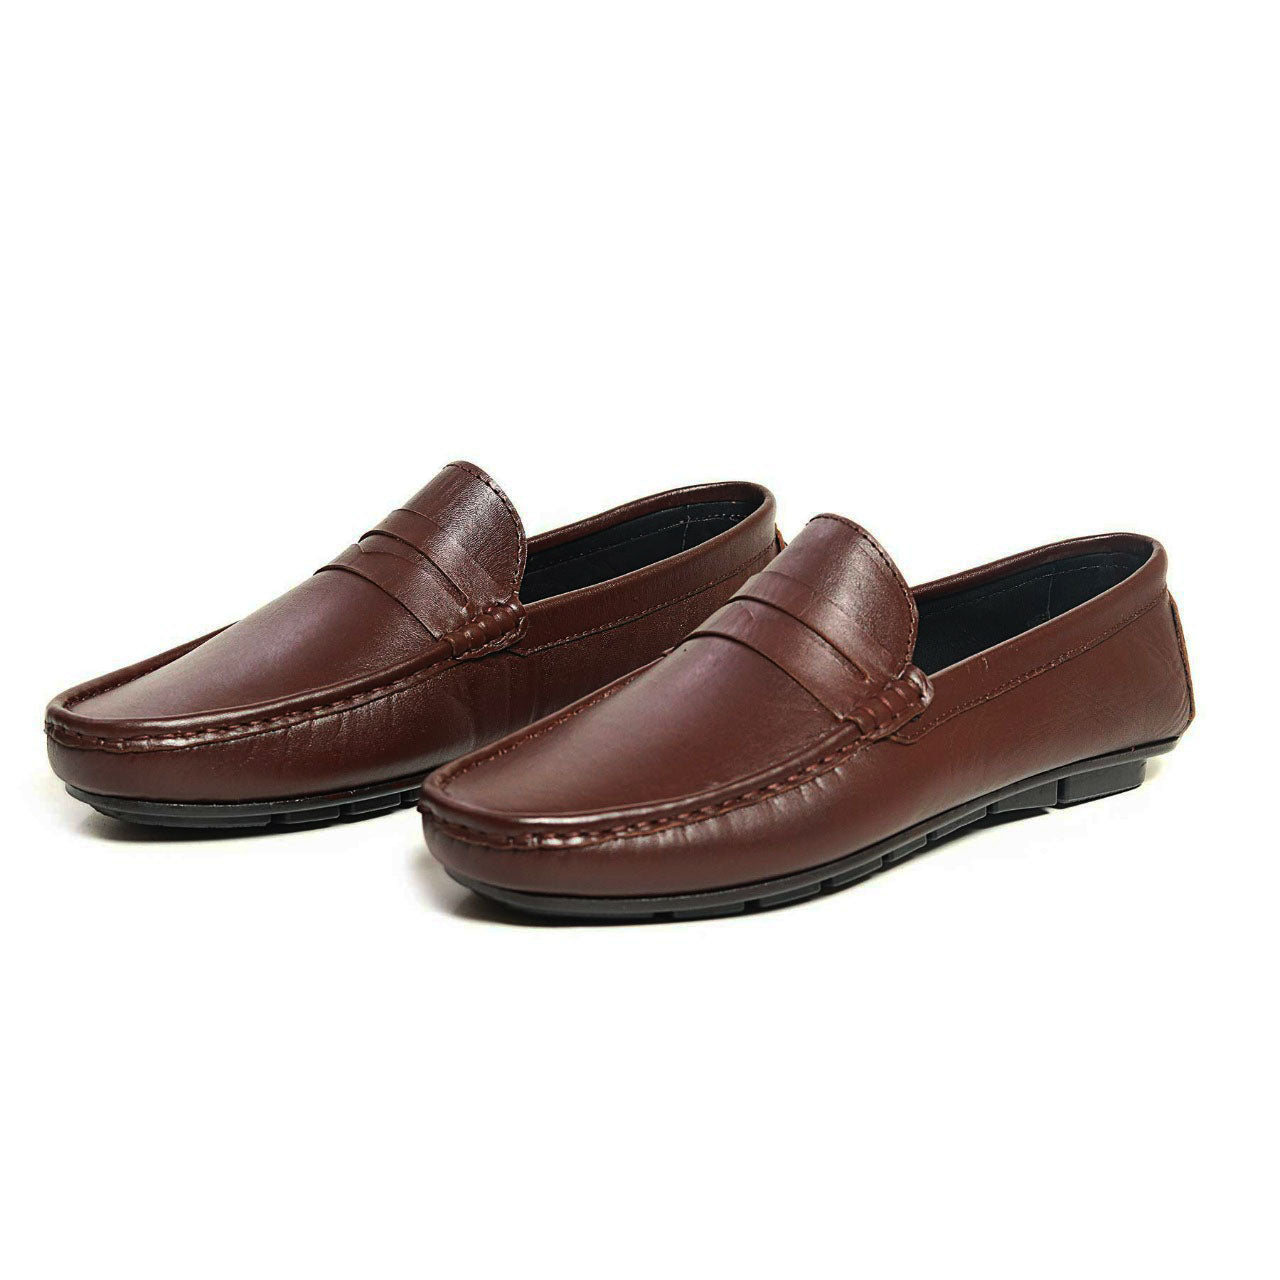 Zays Leather Premium Loafer For Men (Chocolate)- SF72